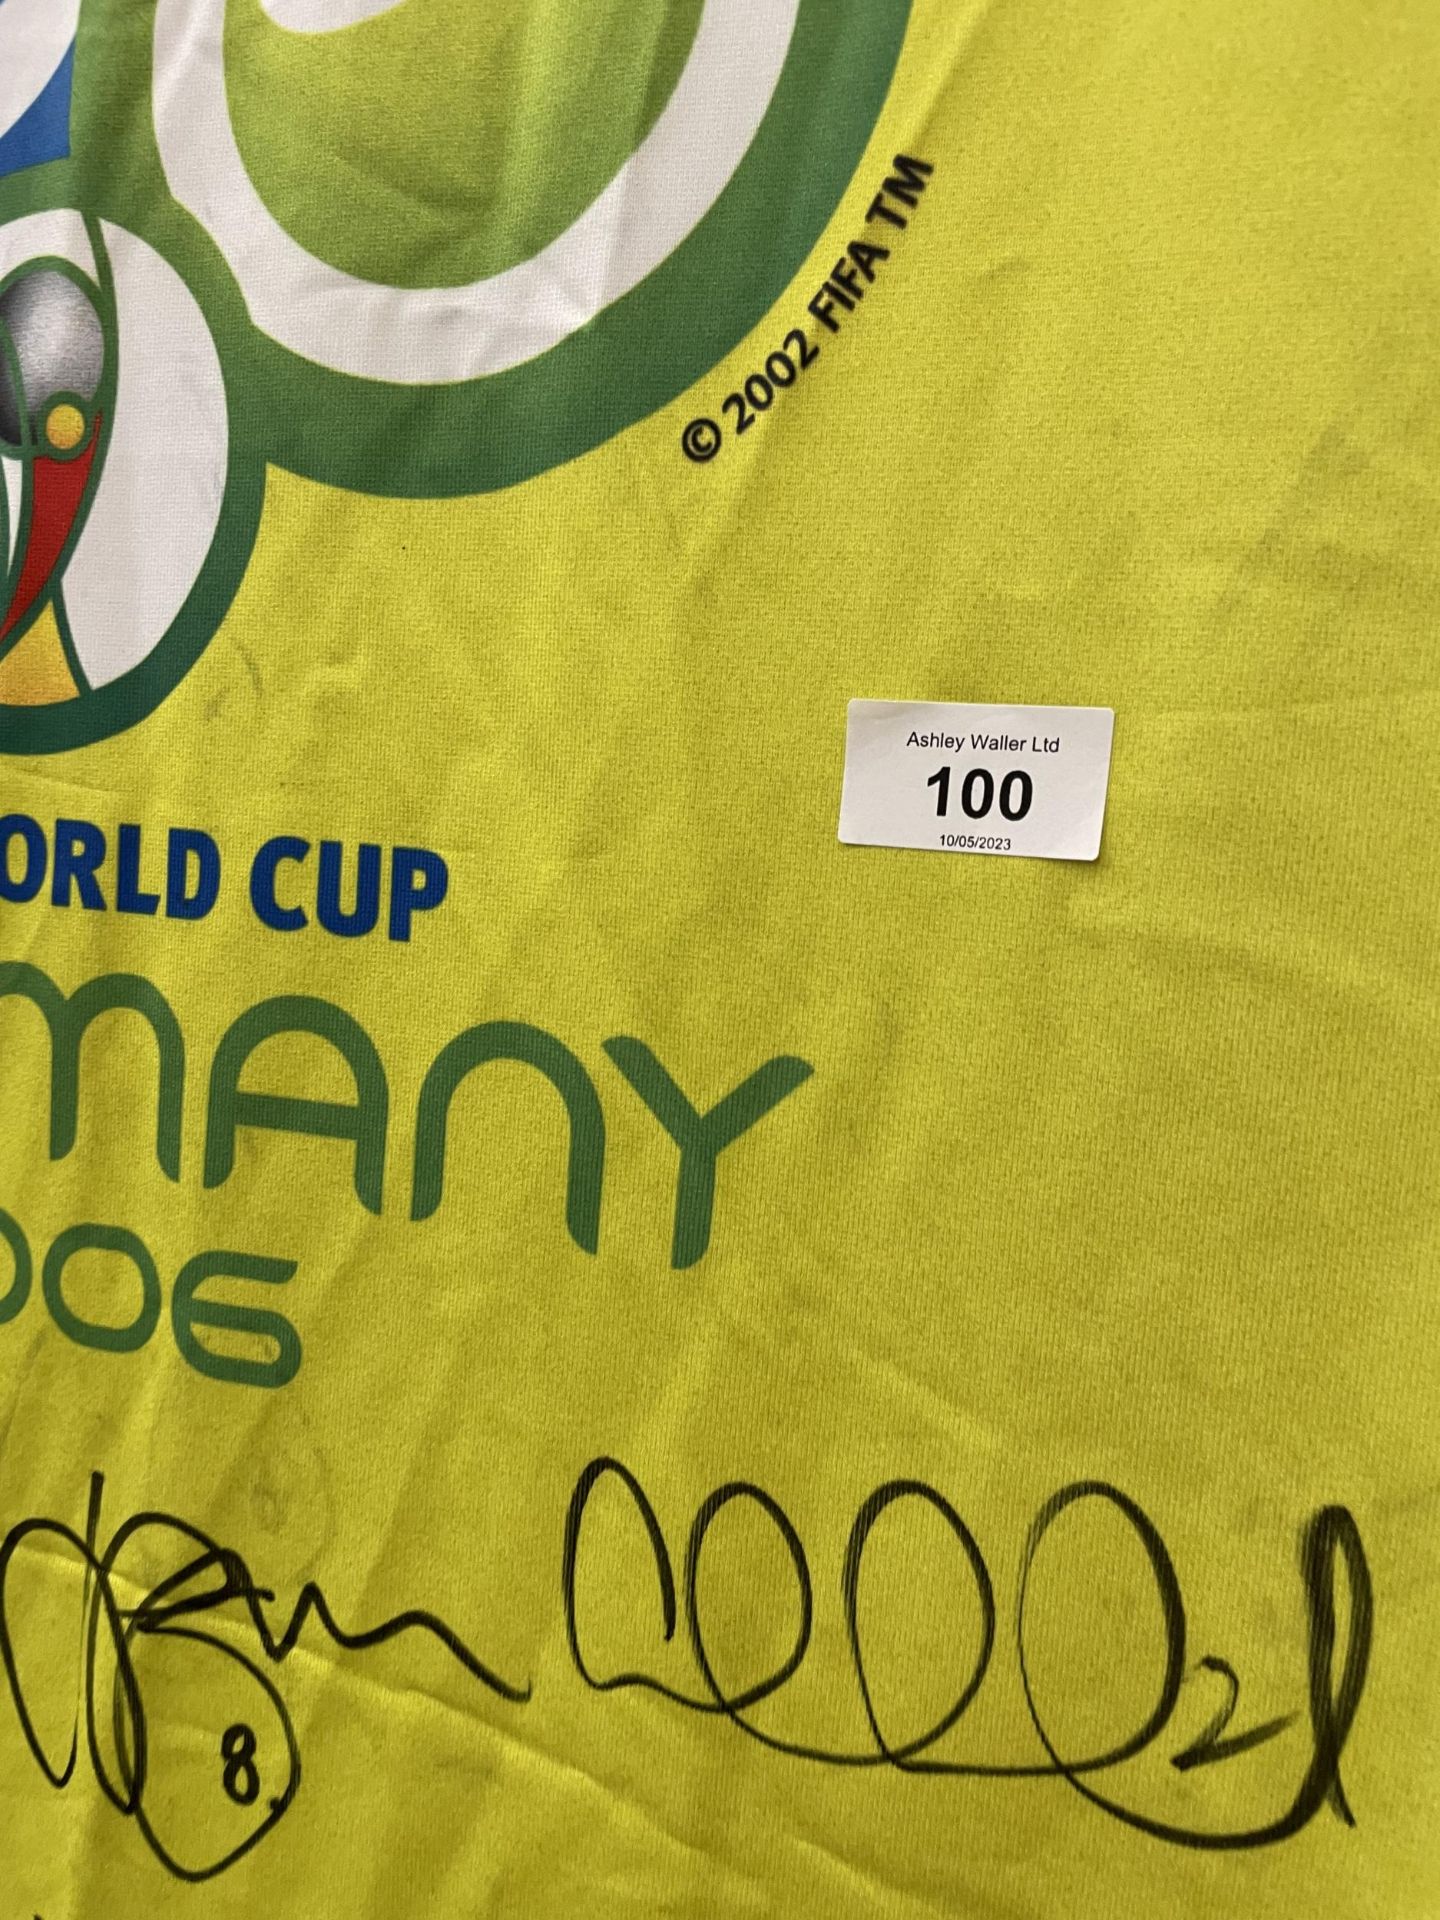 A FIFA WORLD CUP 2006 GERMANY SIGNED FLAG - Image 8 of 8